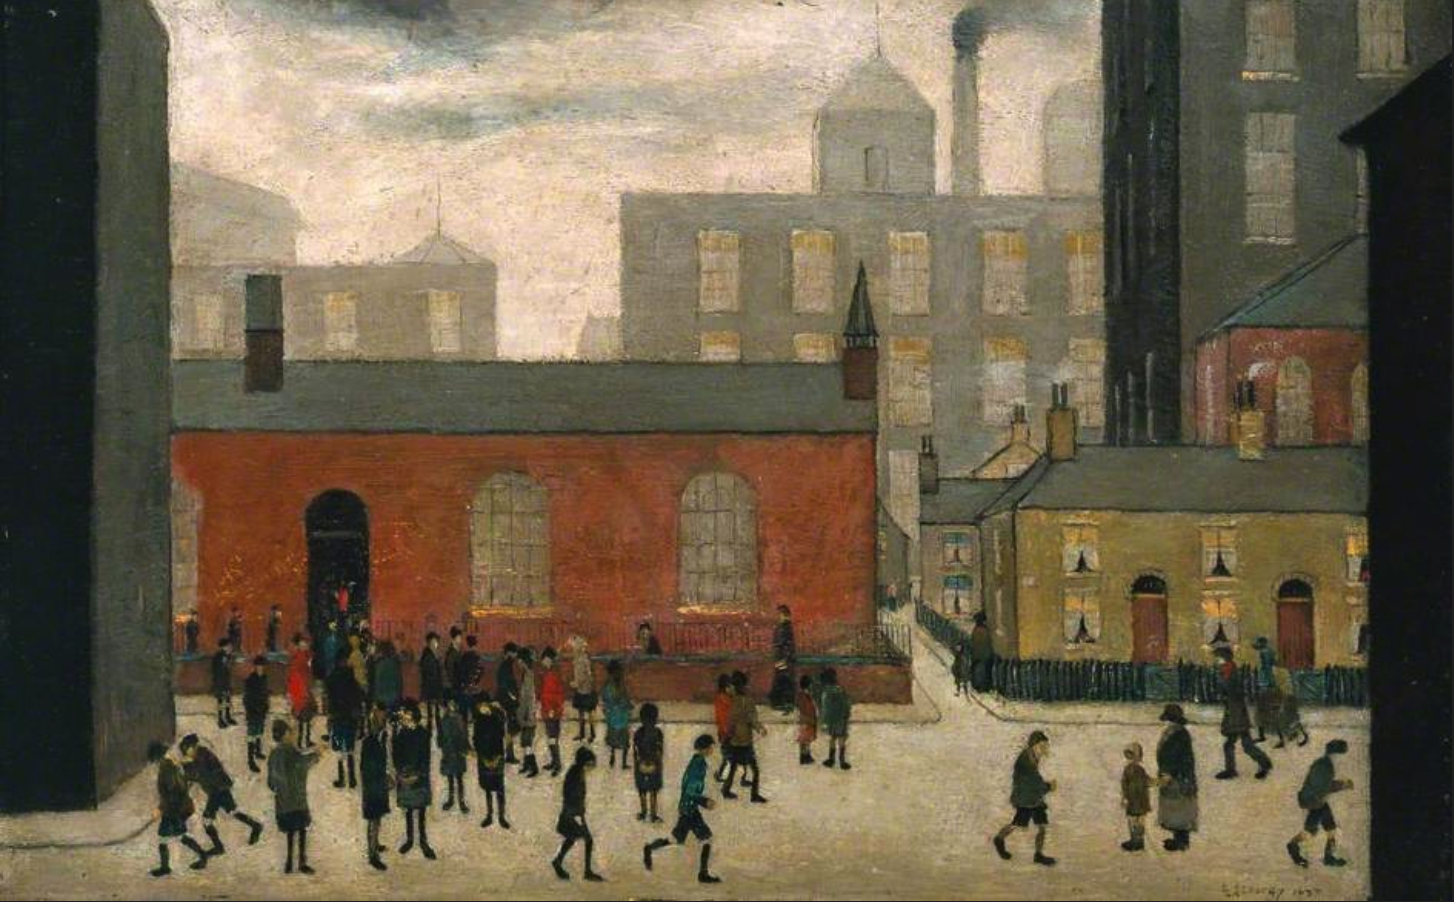 Coming Out of School (1927) by Laurence Stephen Lowry (1887 - 1976), English artist.